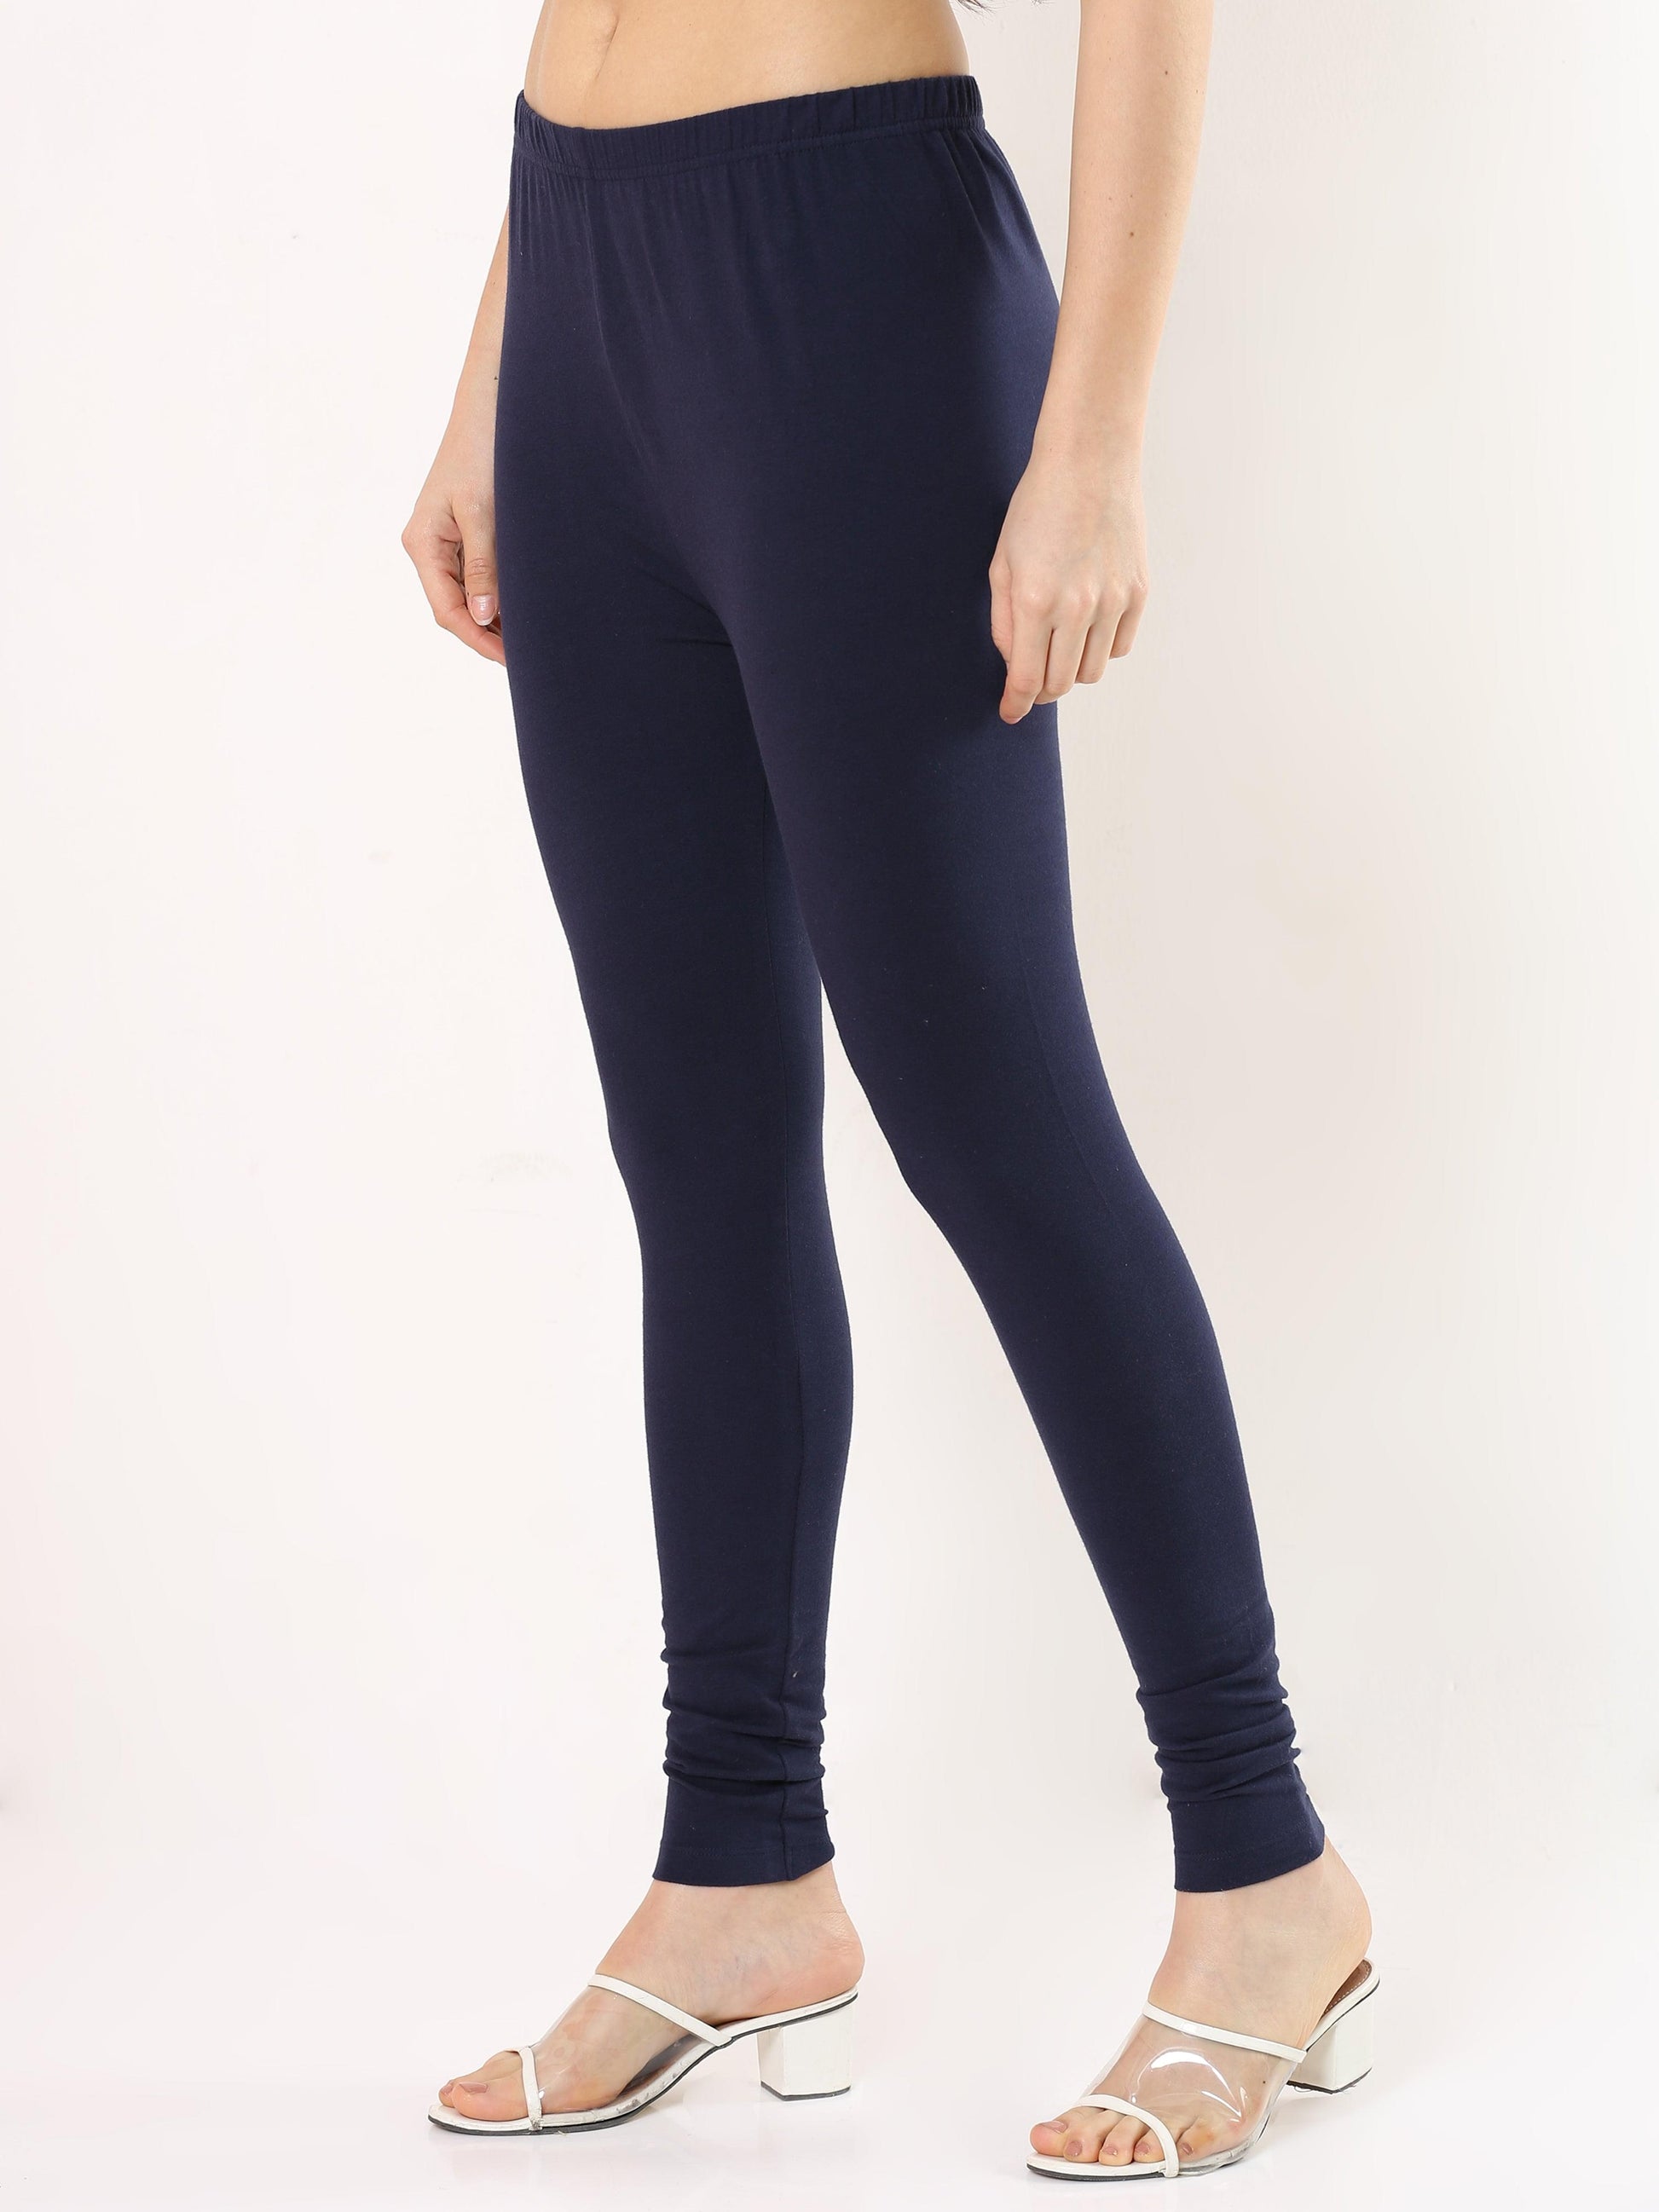 Old Navy High-Rise Leggings Pant Blue Ribbed Cotton Blend Women's